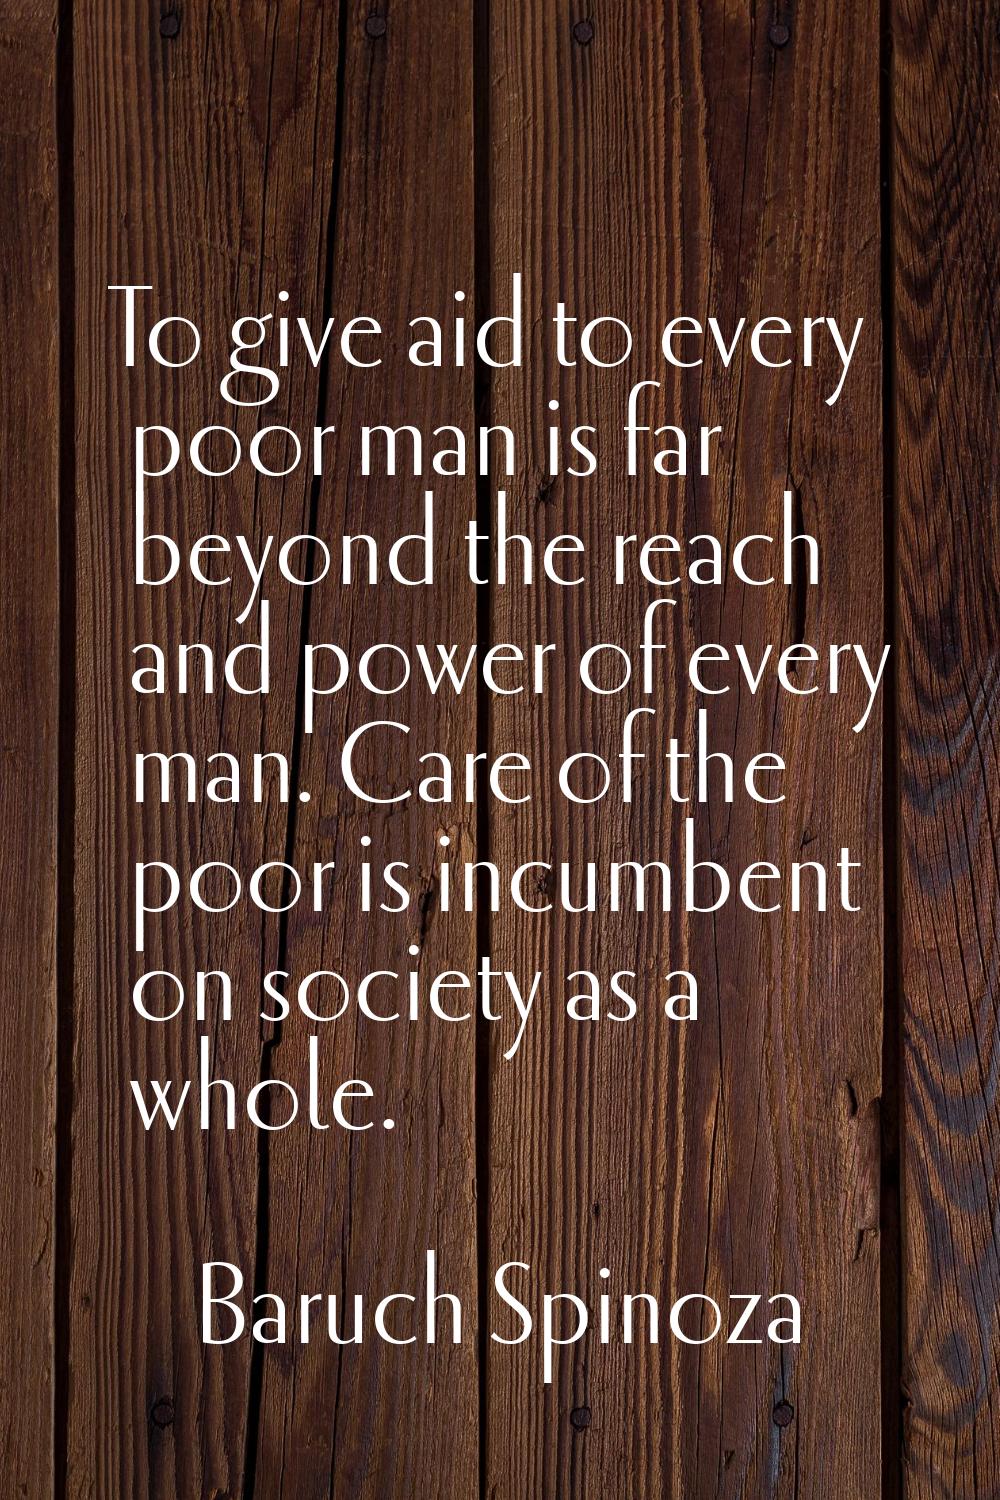 To give aid to every poor man is far beyond the reach and power of every man. Care of the poor is i